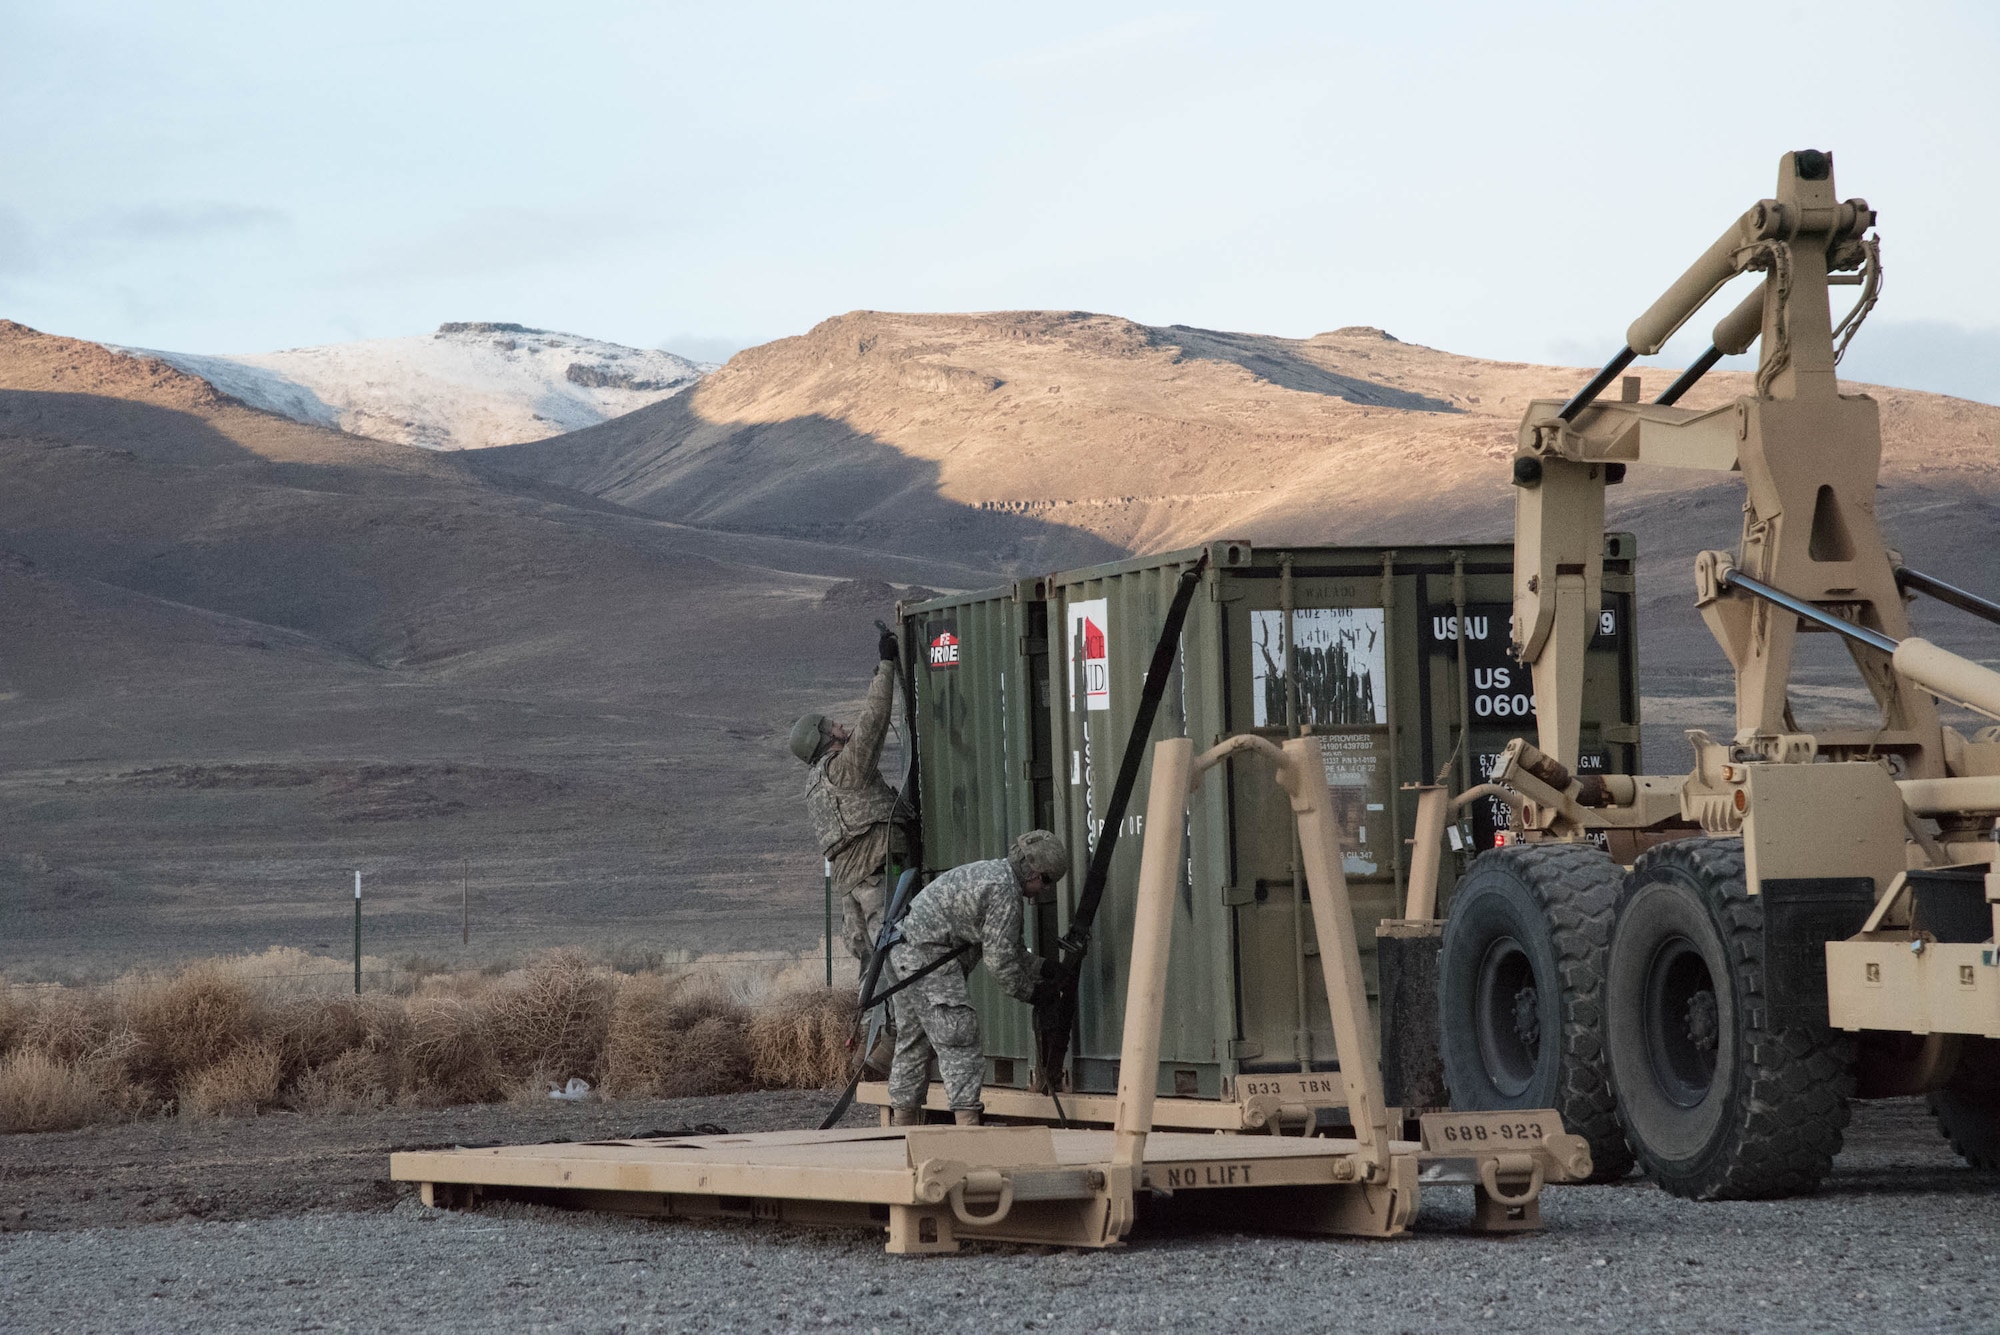 Soldiers from the U.S. Army’s 688th Rapid Port Opening Element secure equipment for transport to the forward node at Amedee Army Airfield, Calif., March 7, 2016. The 688th RPOE is working in conjunction with the Kentucky Air National Guard’s 123rd Contingency Response Group and a team from the Defense Logistics Agency to operate Joint Task Force-Port Opening Sangala during a week-long exercise called Operation Lumberjack. The objective of the JTF-PO is to establish an aerial port of debarkation, provide initial distribution capability and set up warehousing for distribution beyond a forward node. (Kentucky Air National Guard photo by 1st Lt. James Killen)